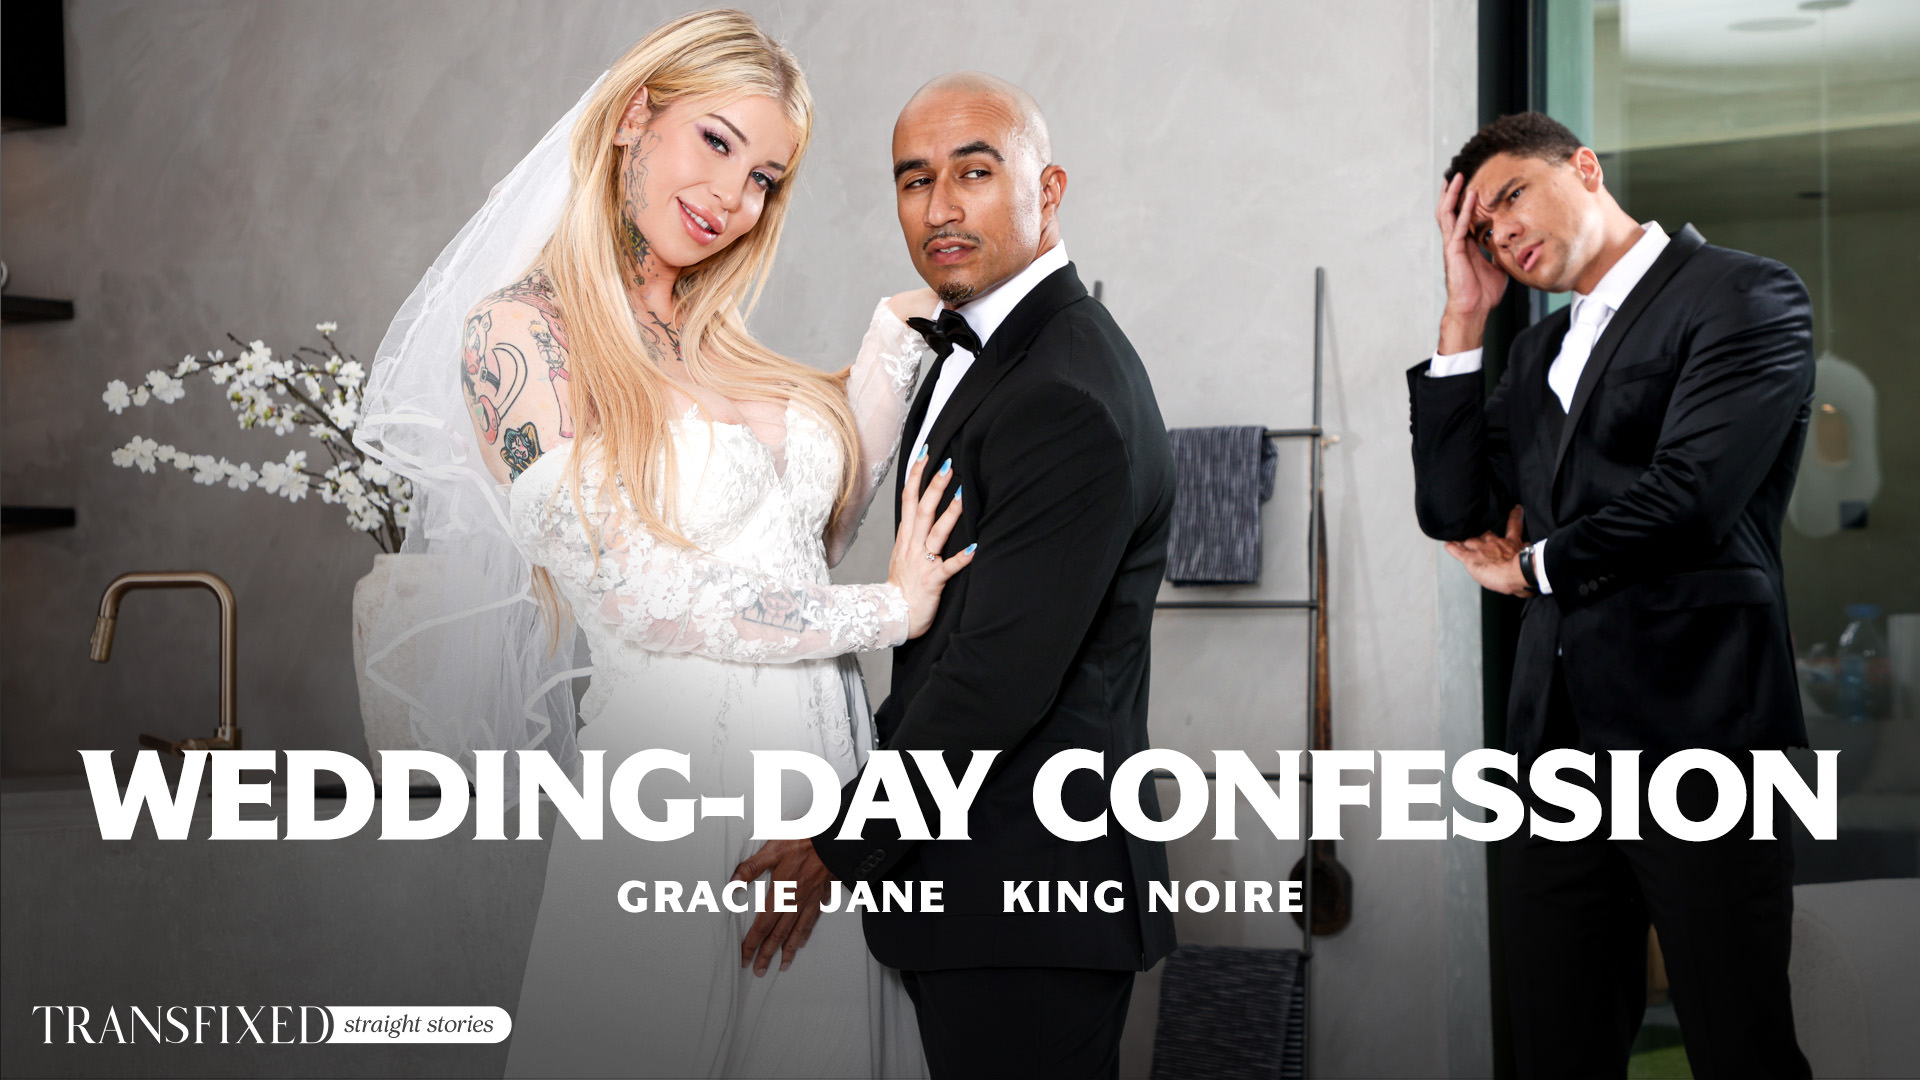 Gracie Jane, King Noire “Wedding-Day Confession” Transfixed